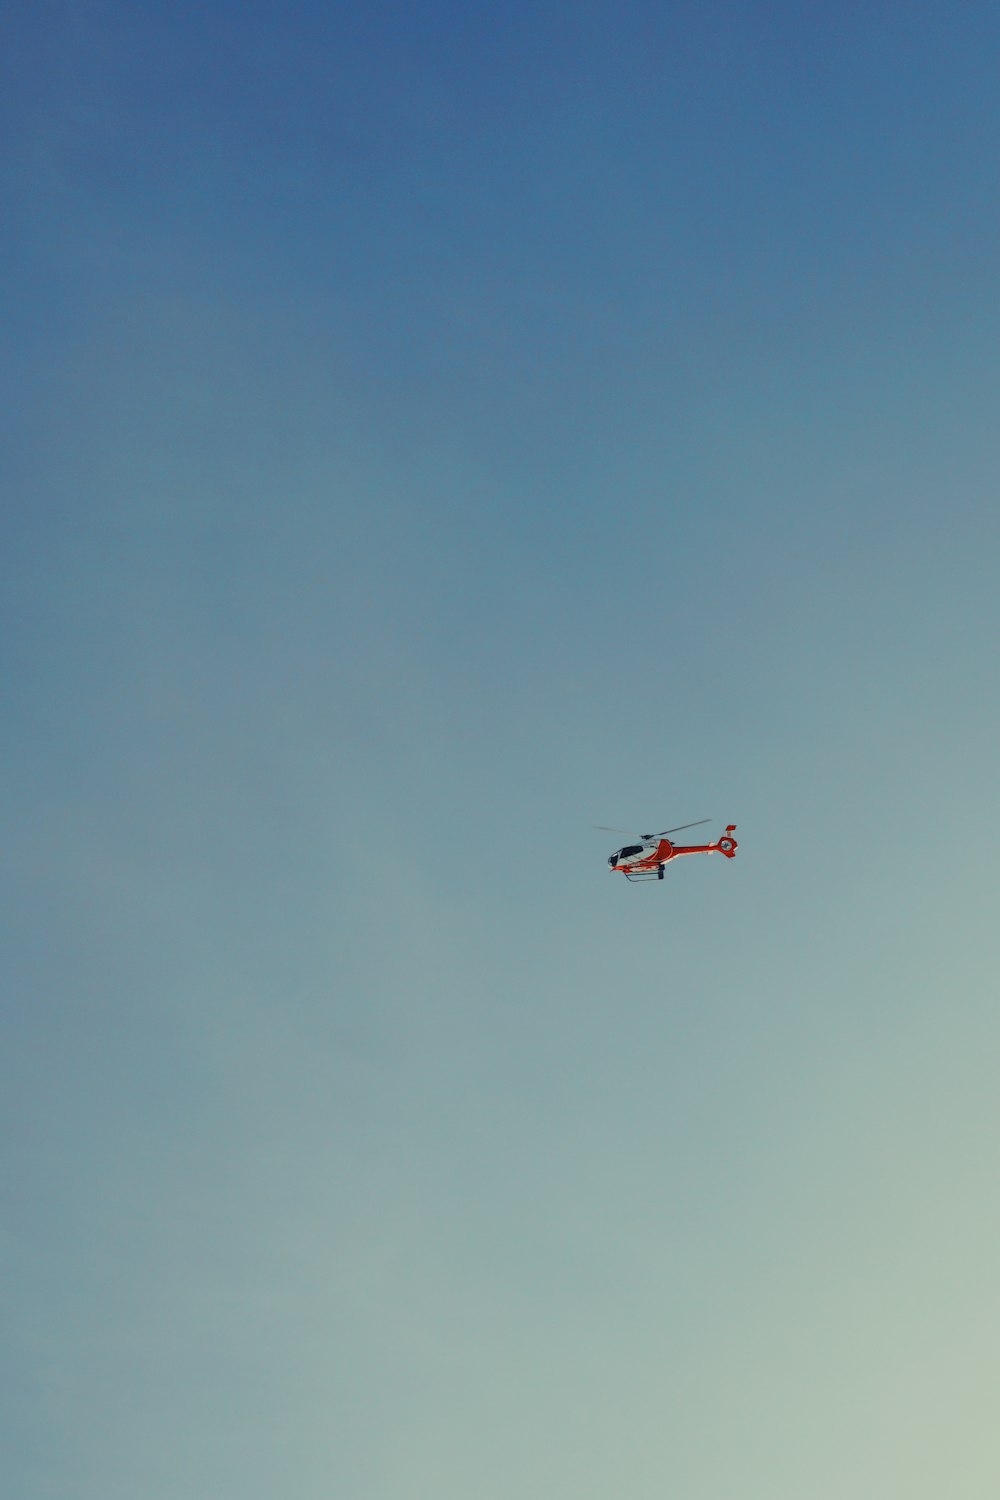 red and white airplane flying in the sky during daytime